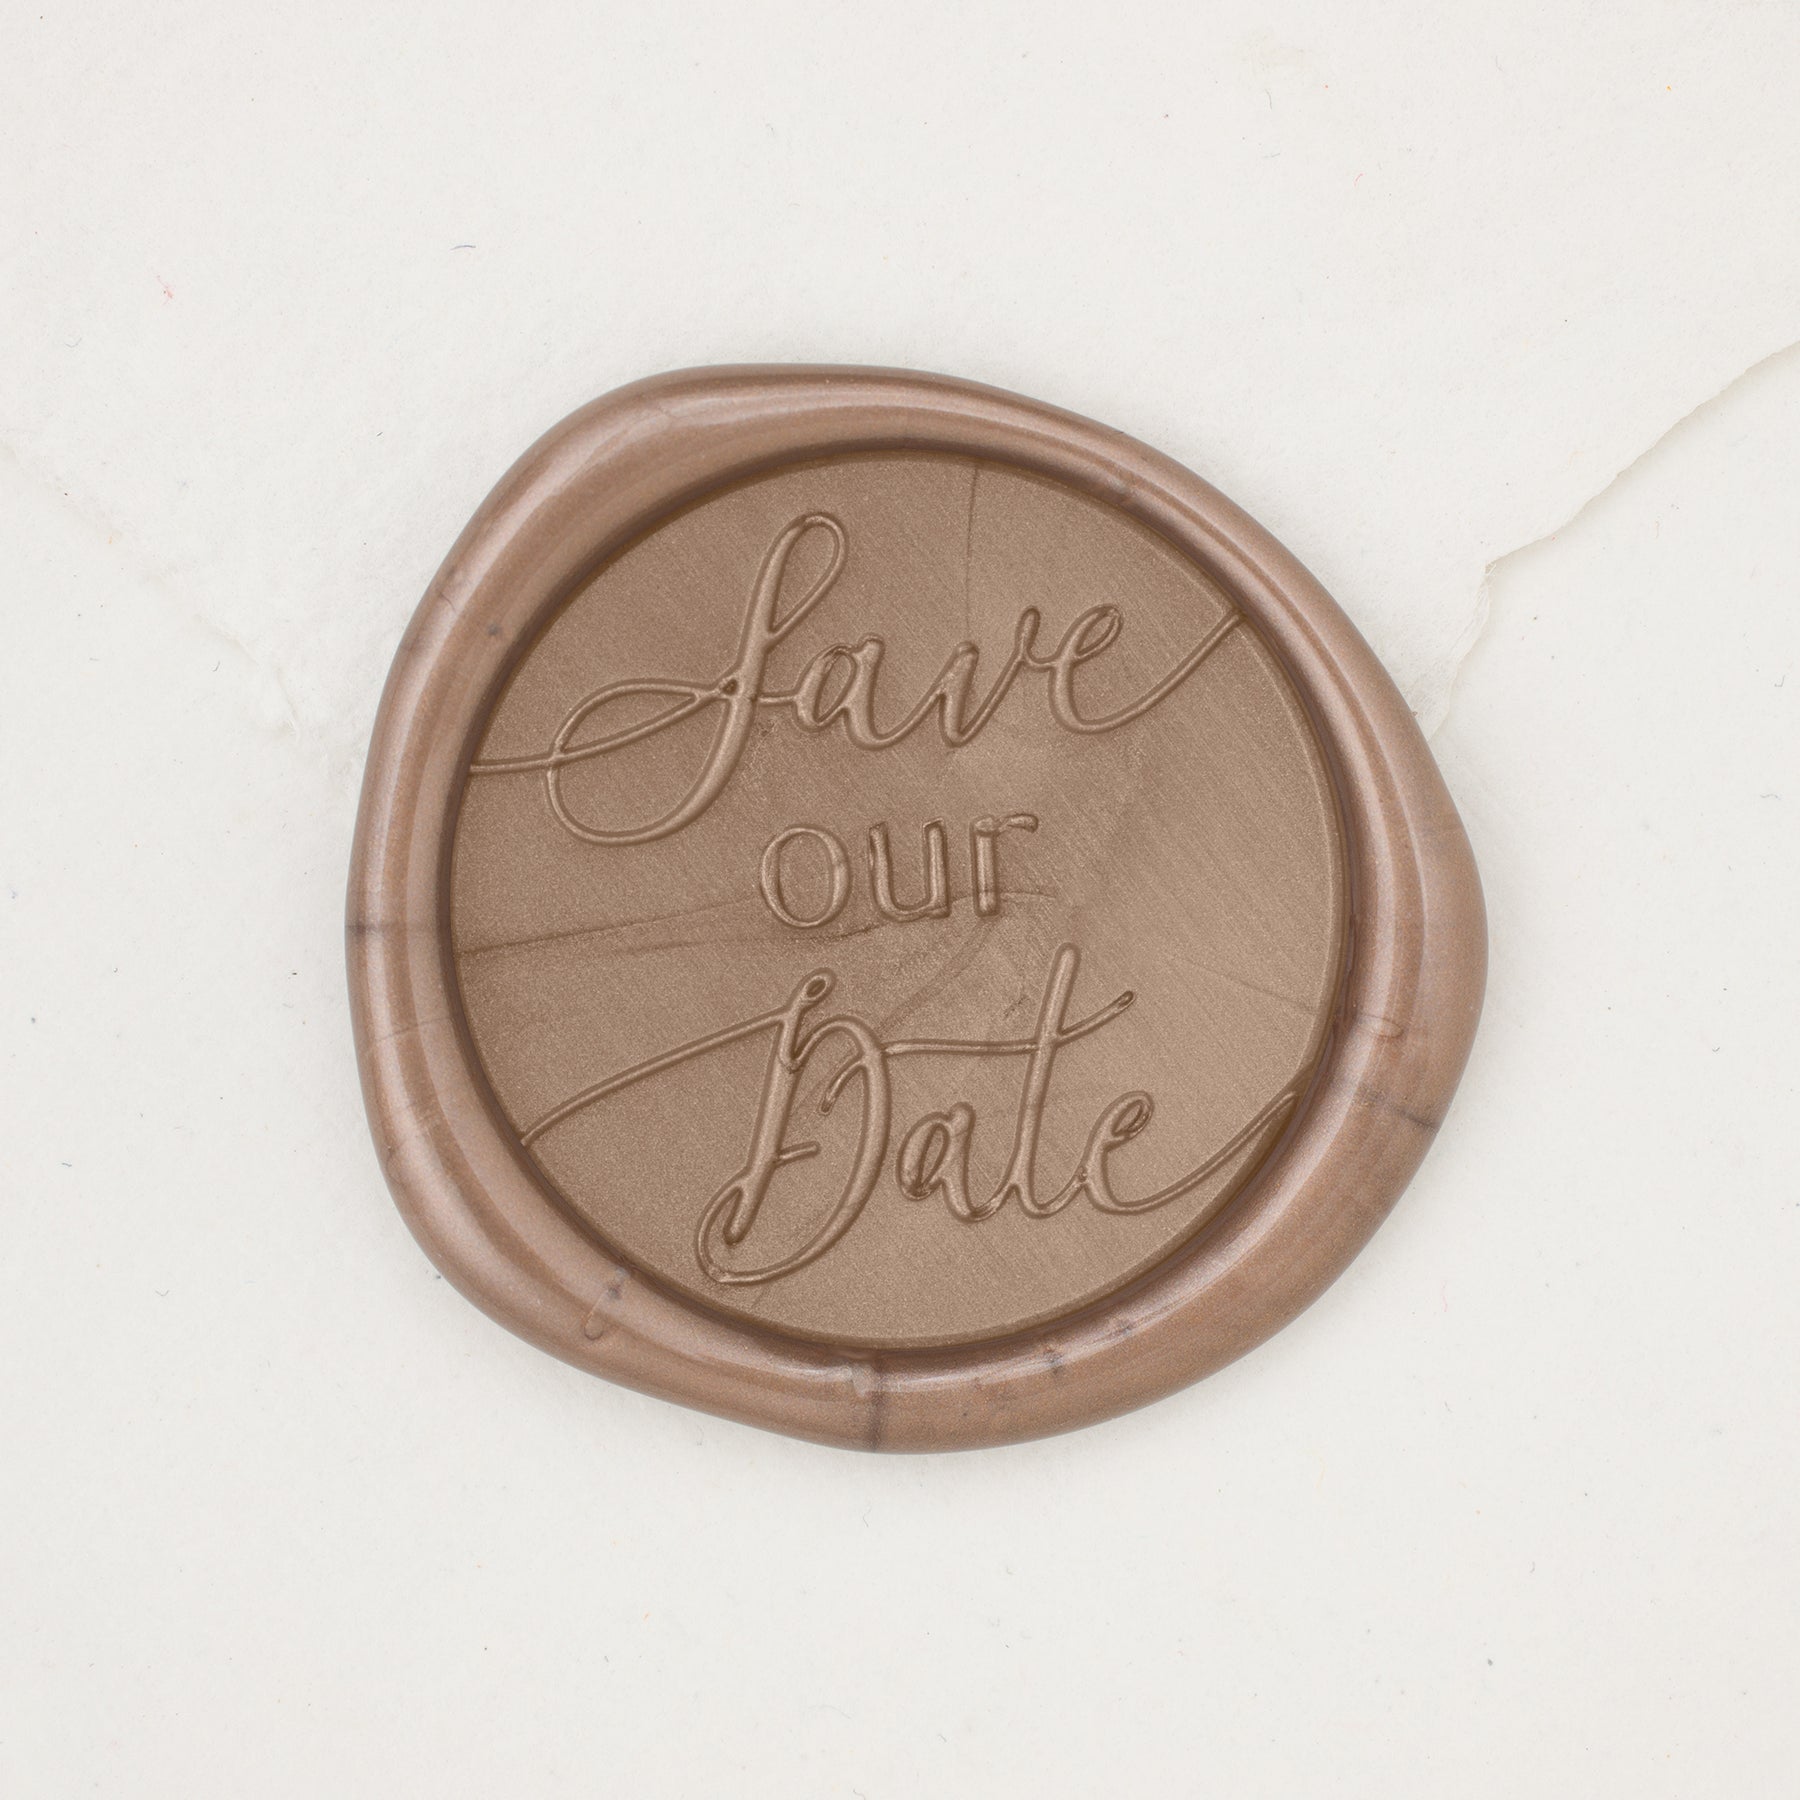 Save Our Date Script Wax Seals